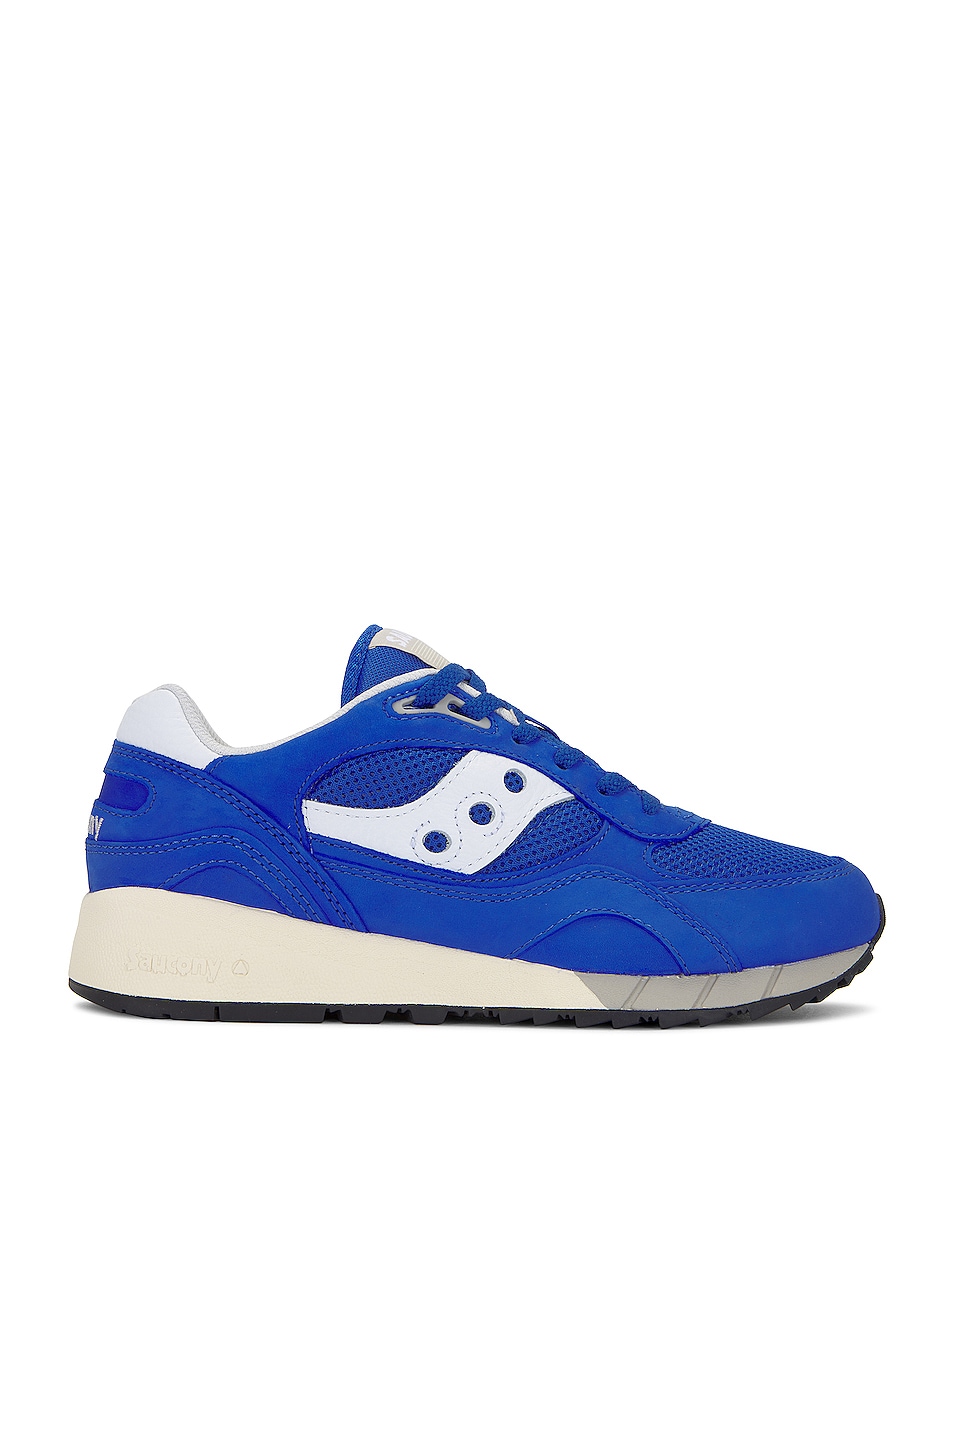 Image 1 of Saucony Shadow 6000 Sneaker in Blue